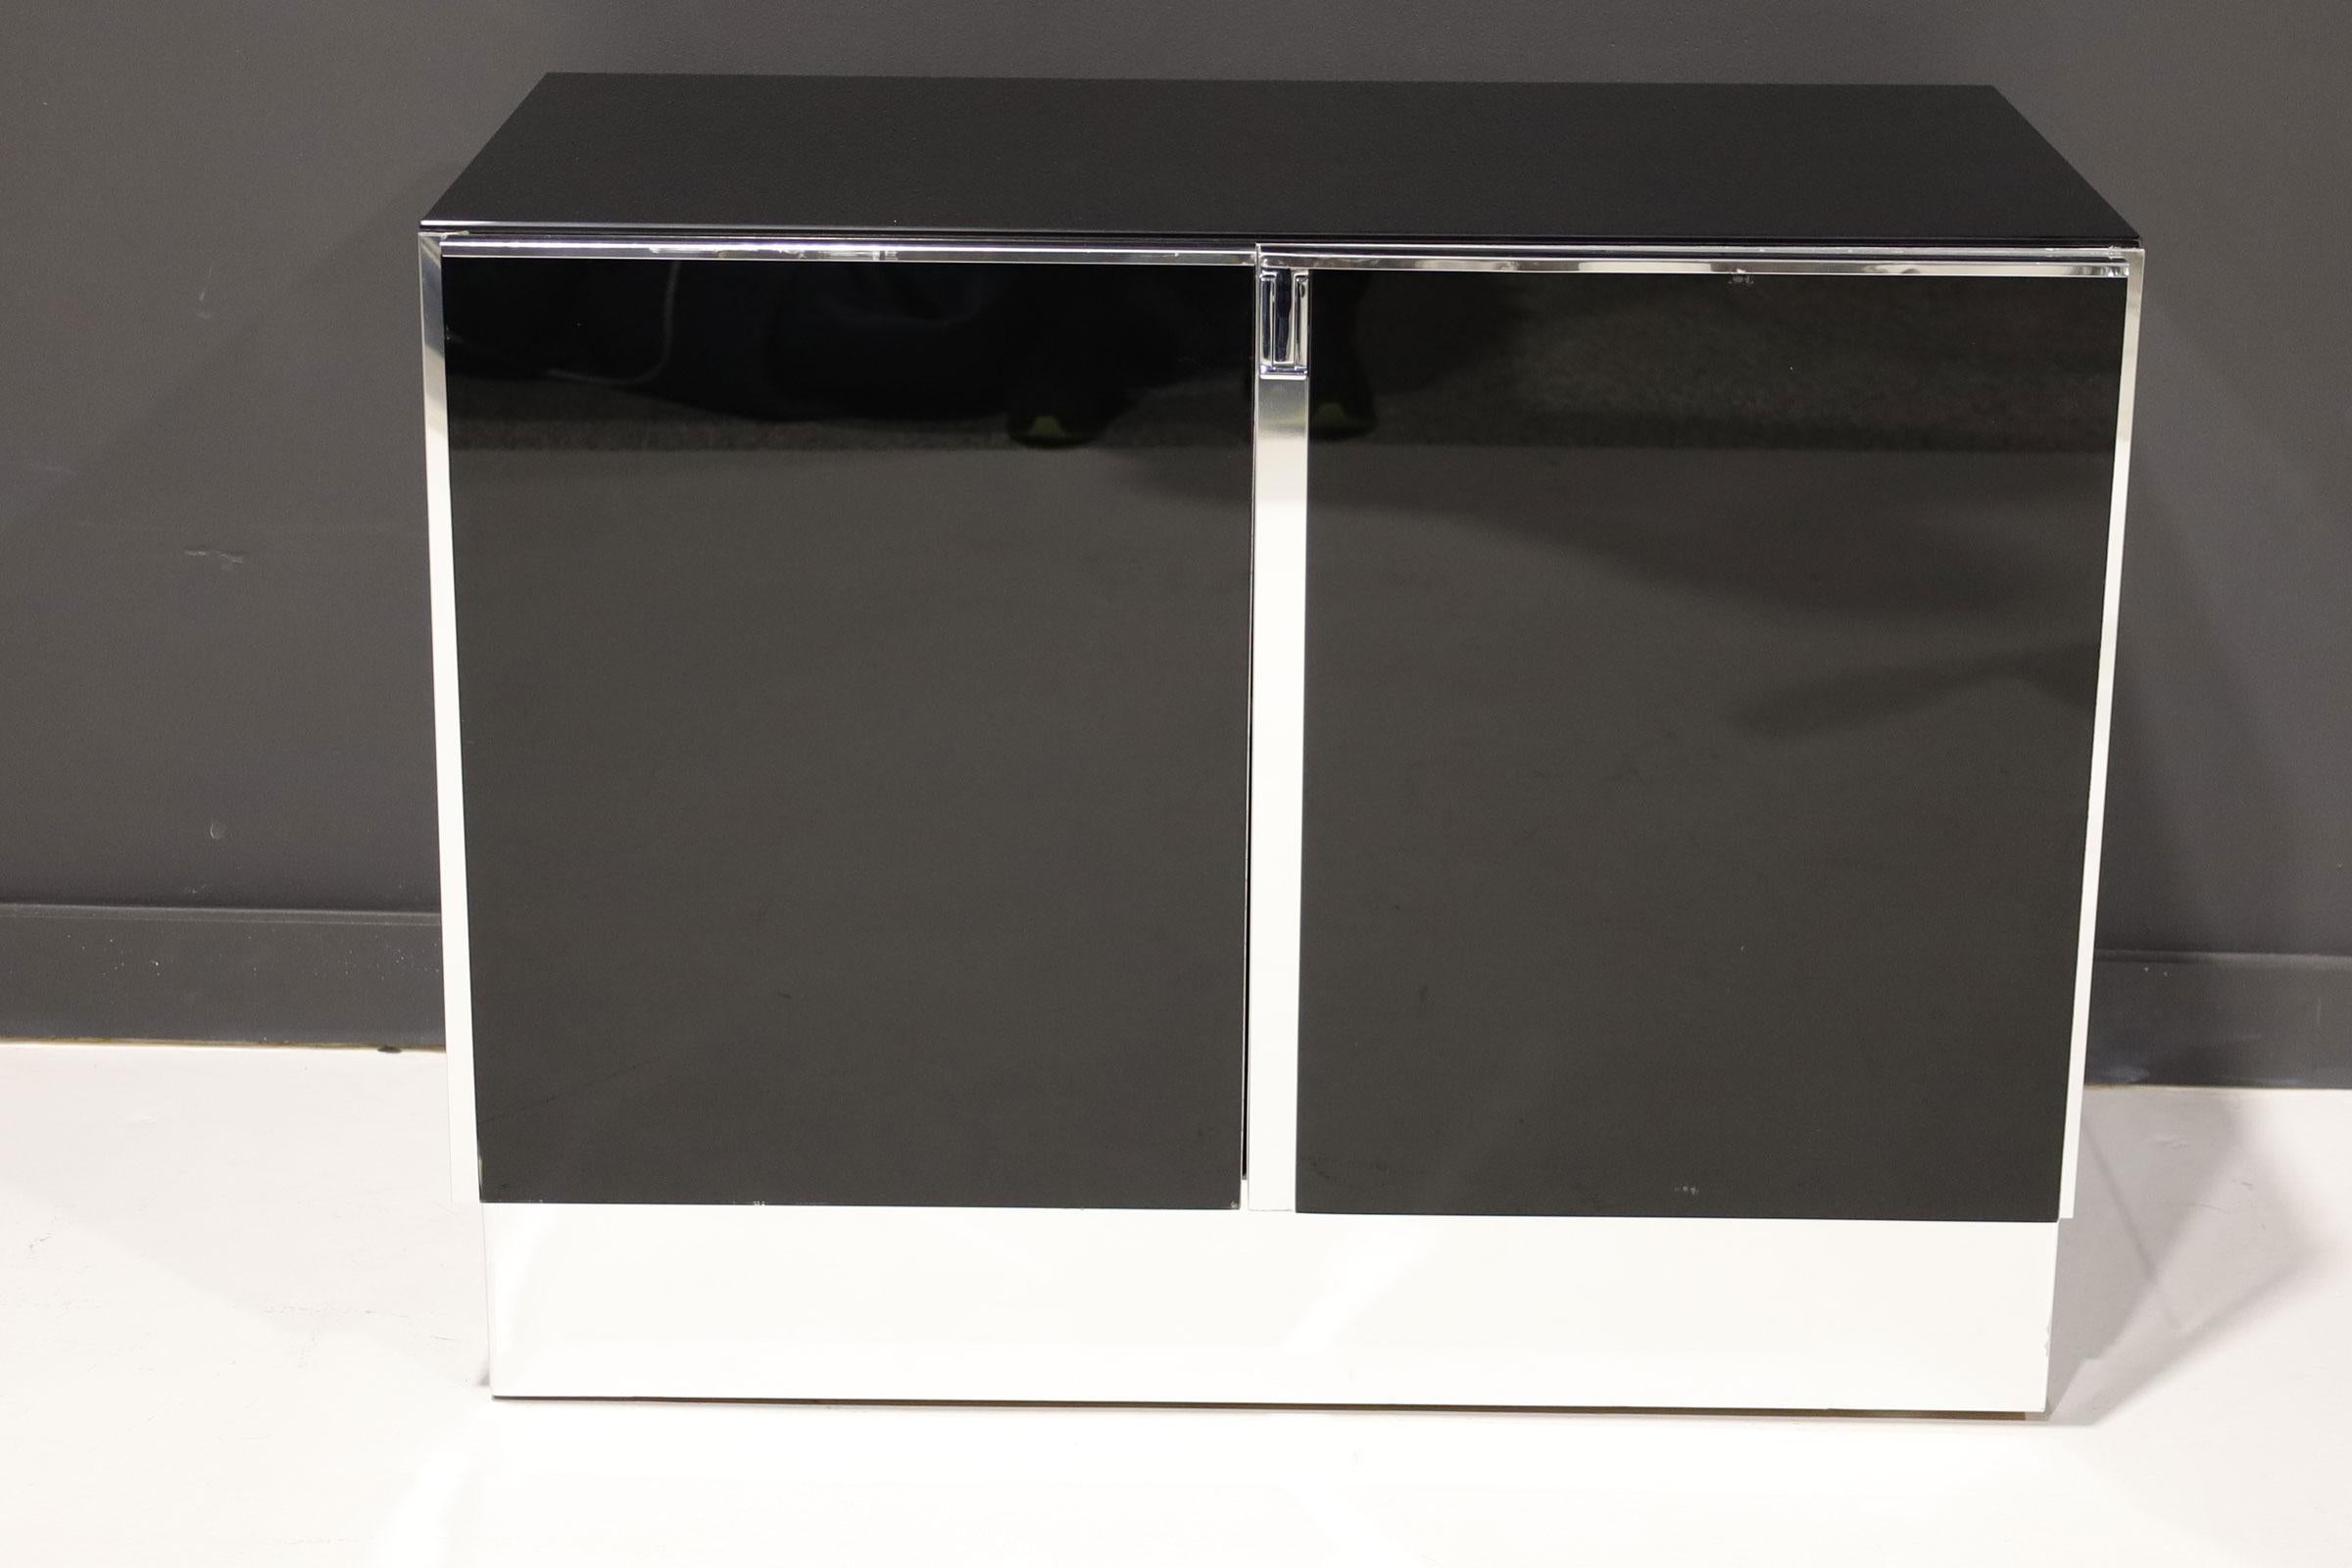 Ello Black Glass Top Sideboard/Cabinet with Chrome Trim In Good Condition For Sale In Dallas, TX